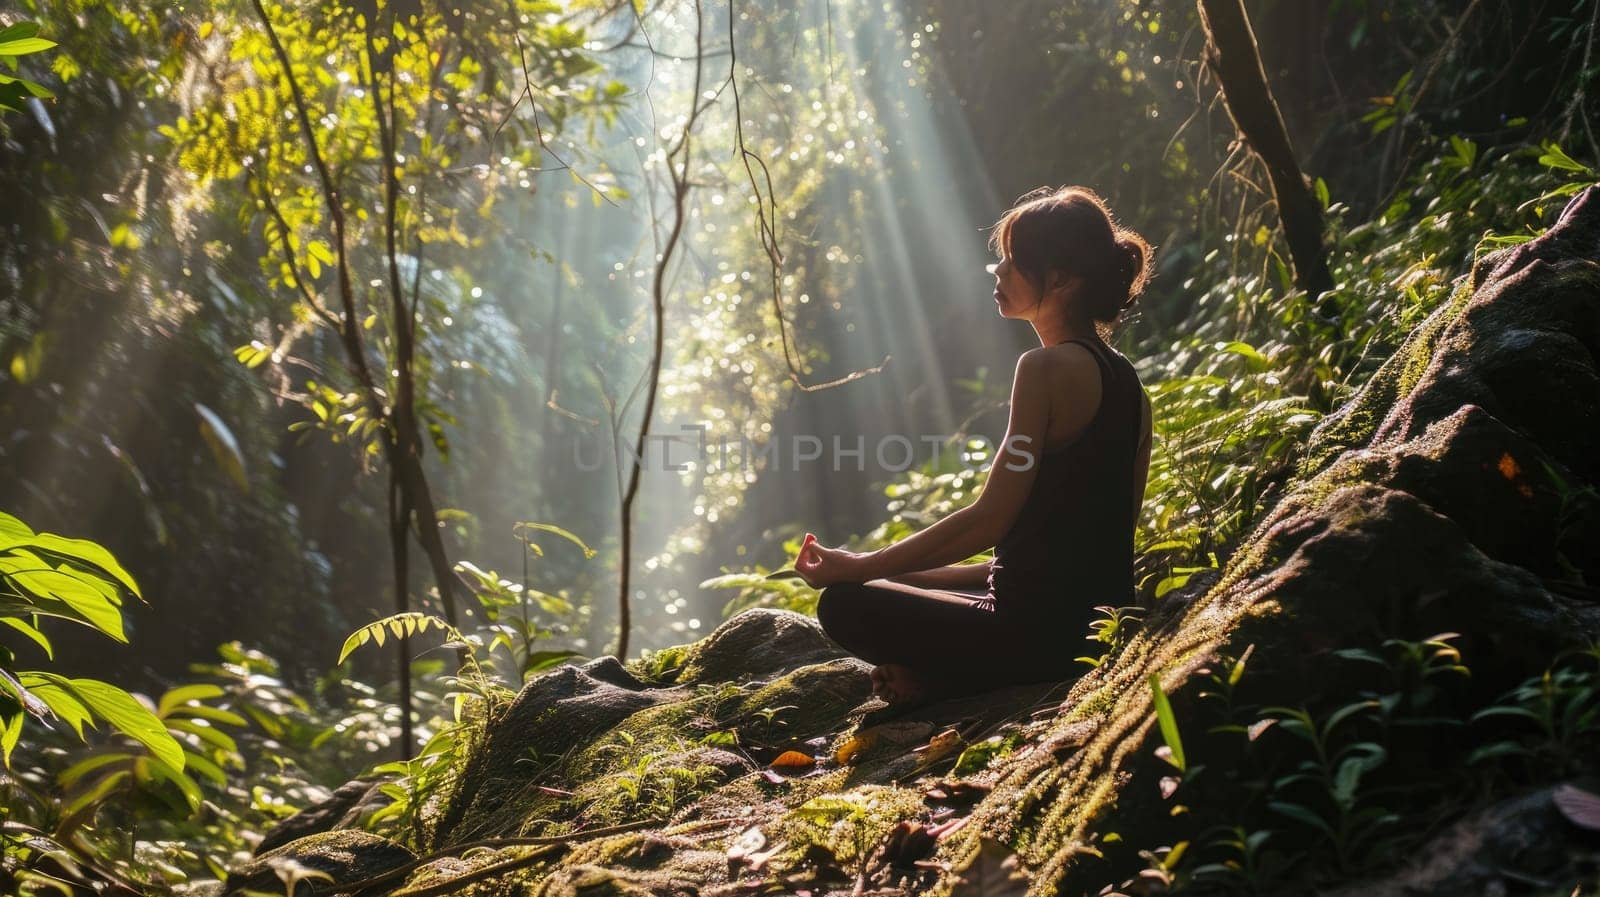 The picture of a young or adult female human doing yoga pose in nature. AIGX03. by biancoblue